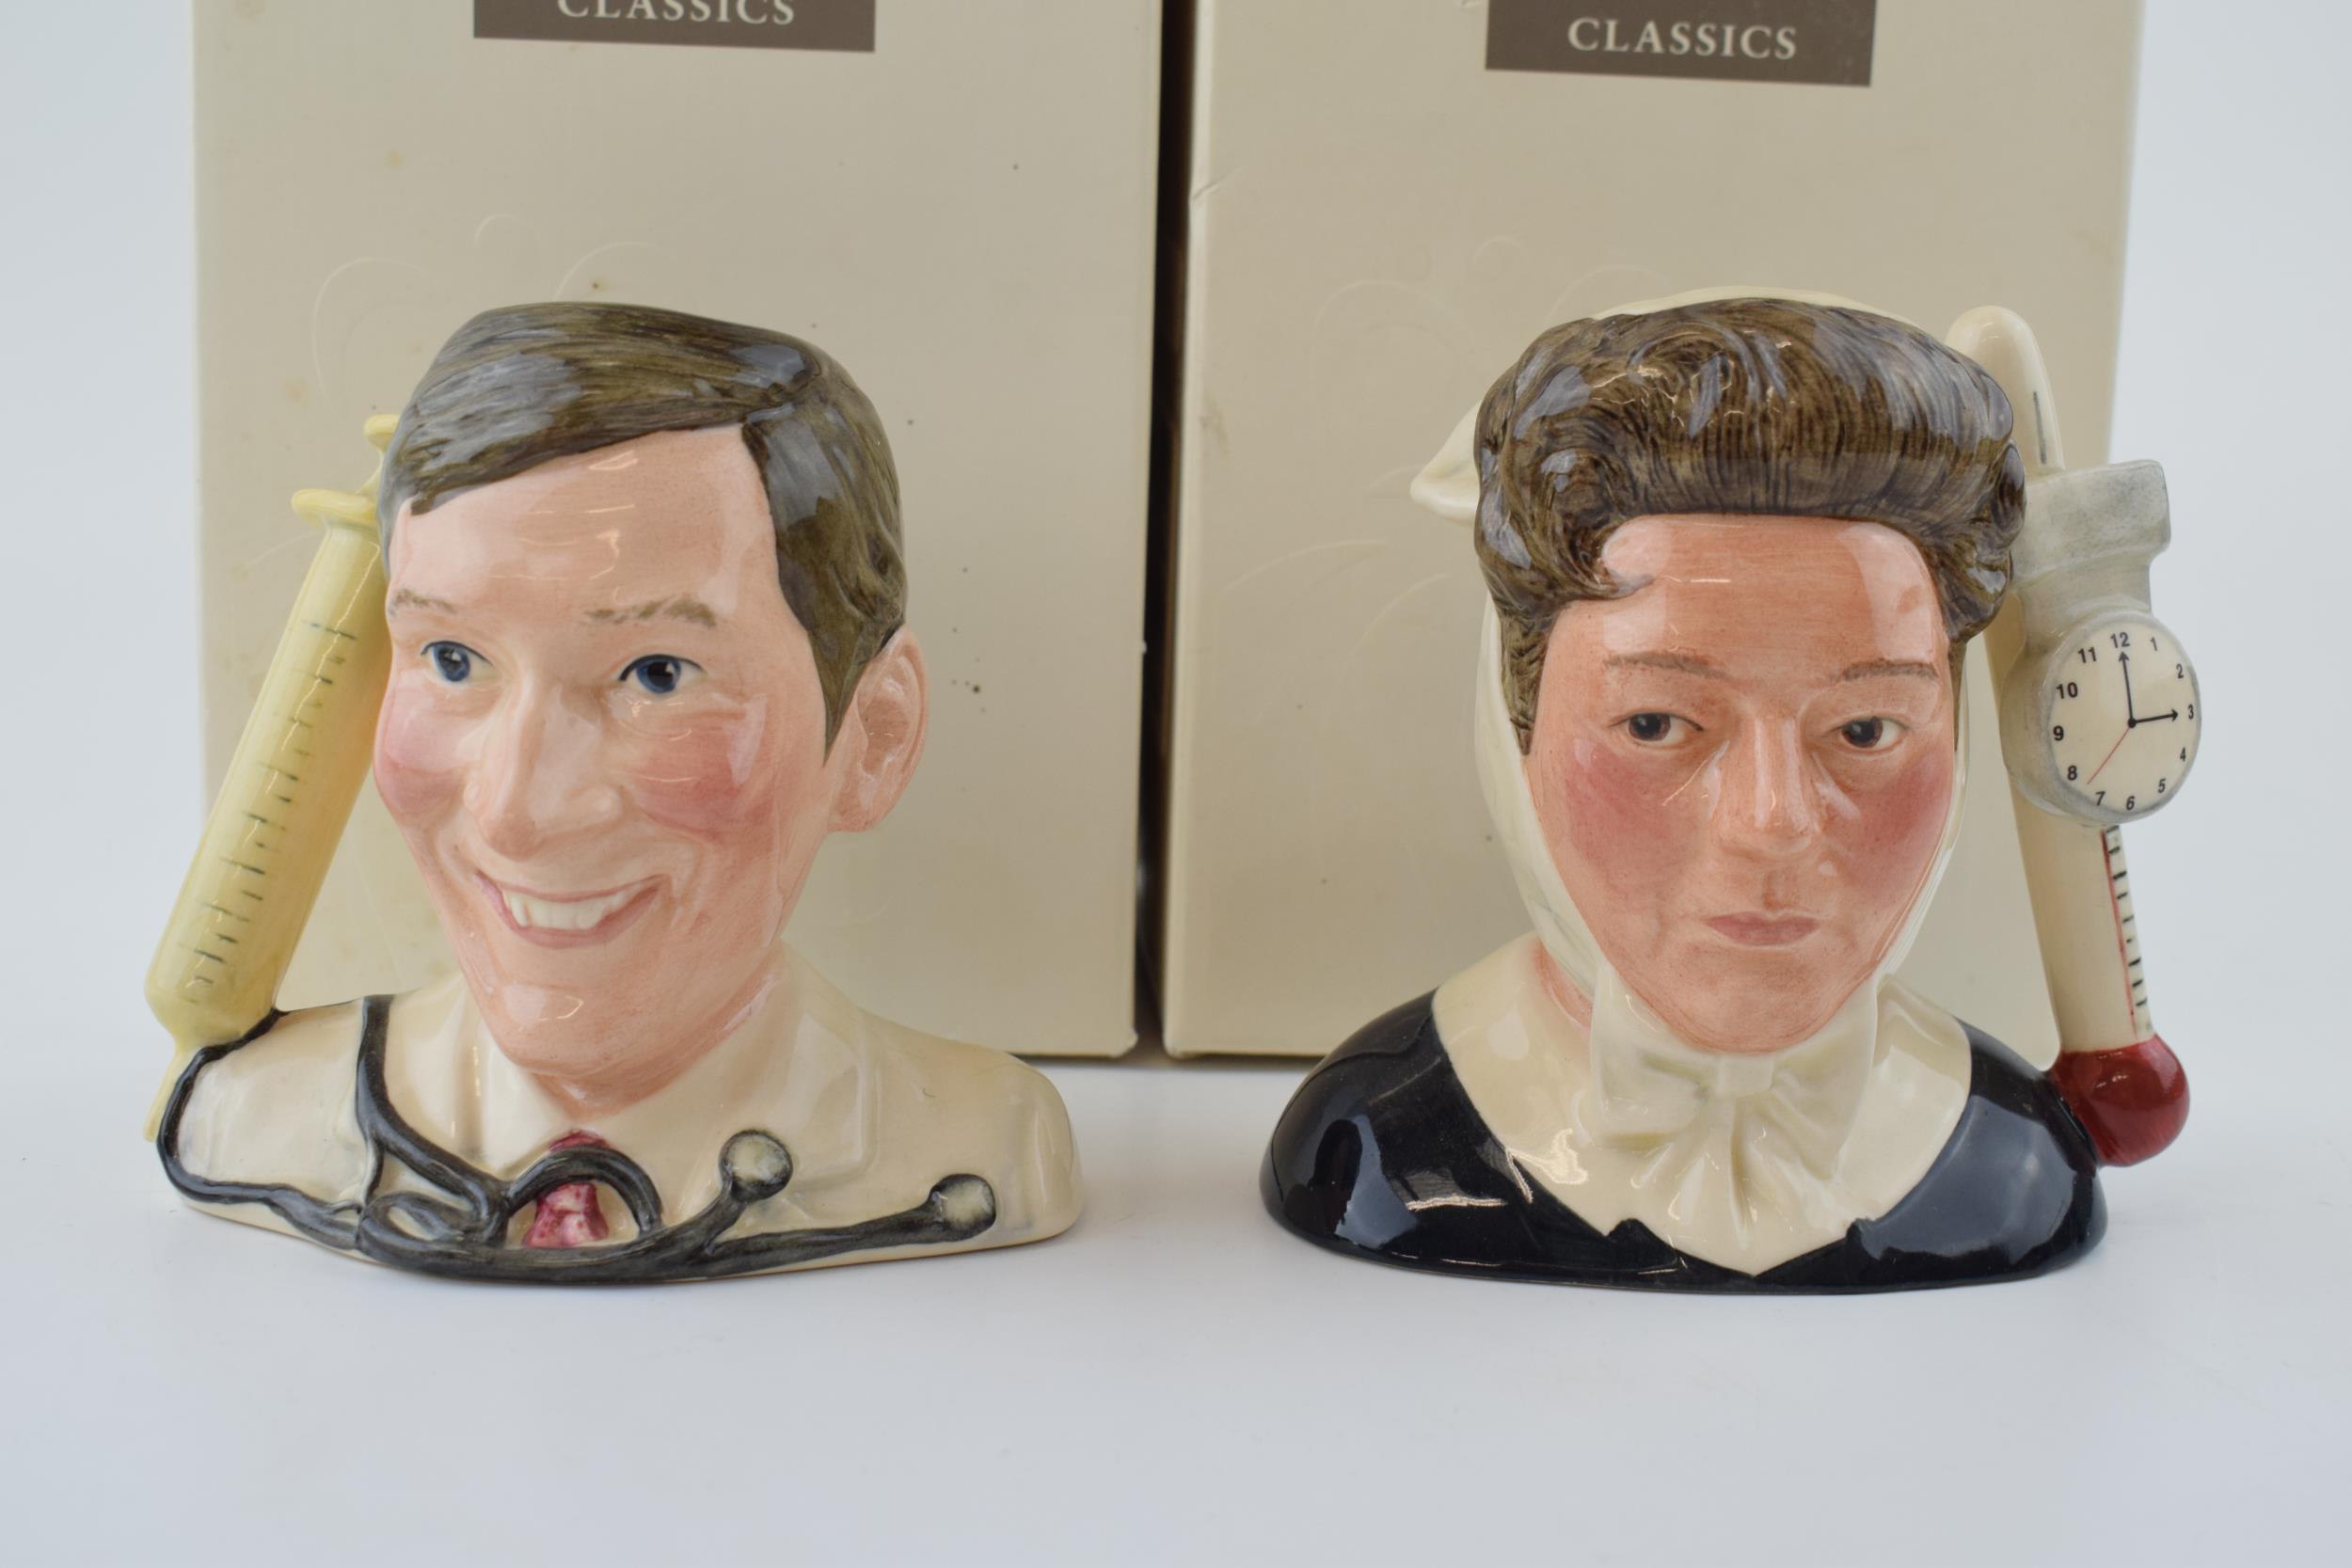 Small Royal Doulton character jugs Carry On Classics Hattie Jacques and Kenneth Williams (2), both